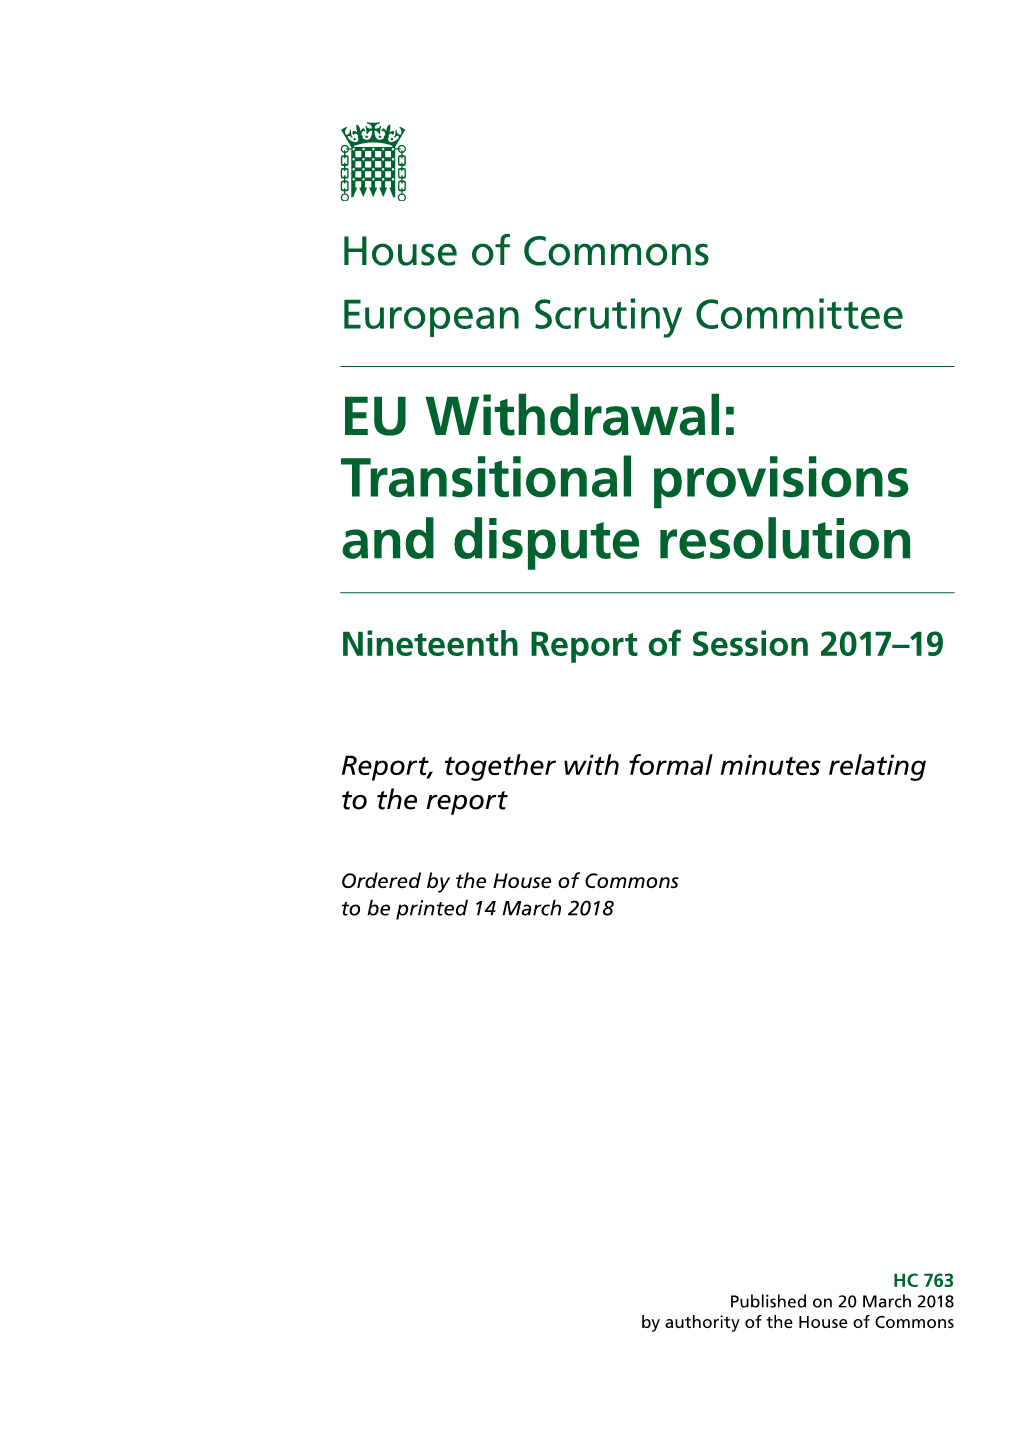 EU Withdrawal: Transitional Provisions and Dispute Resolution